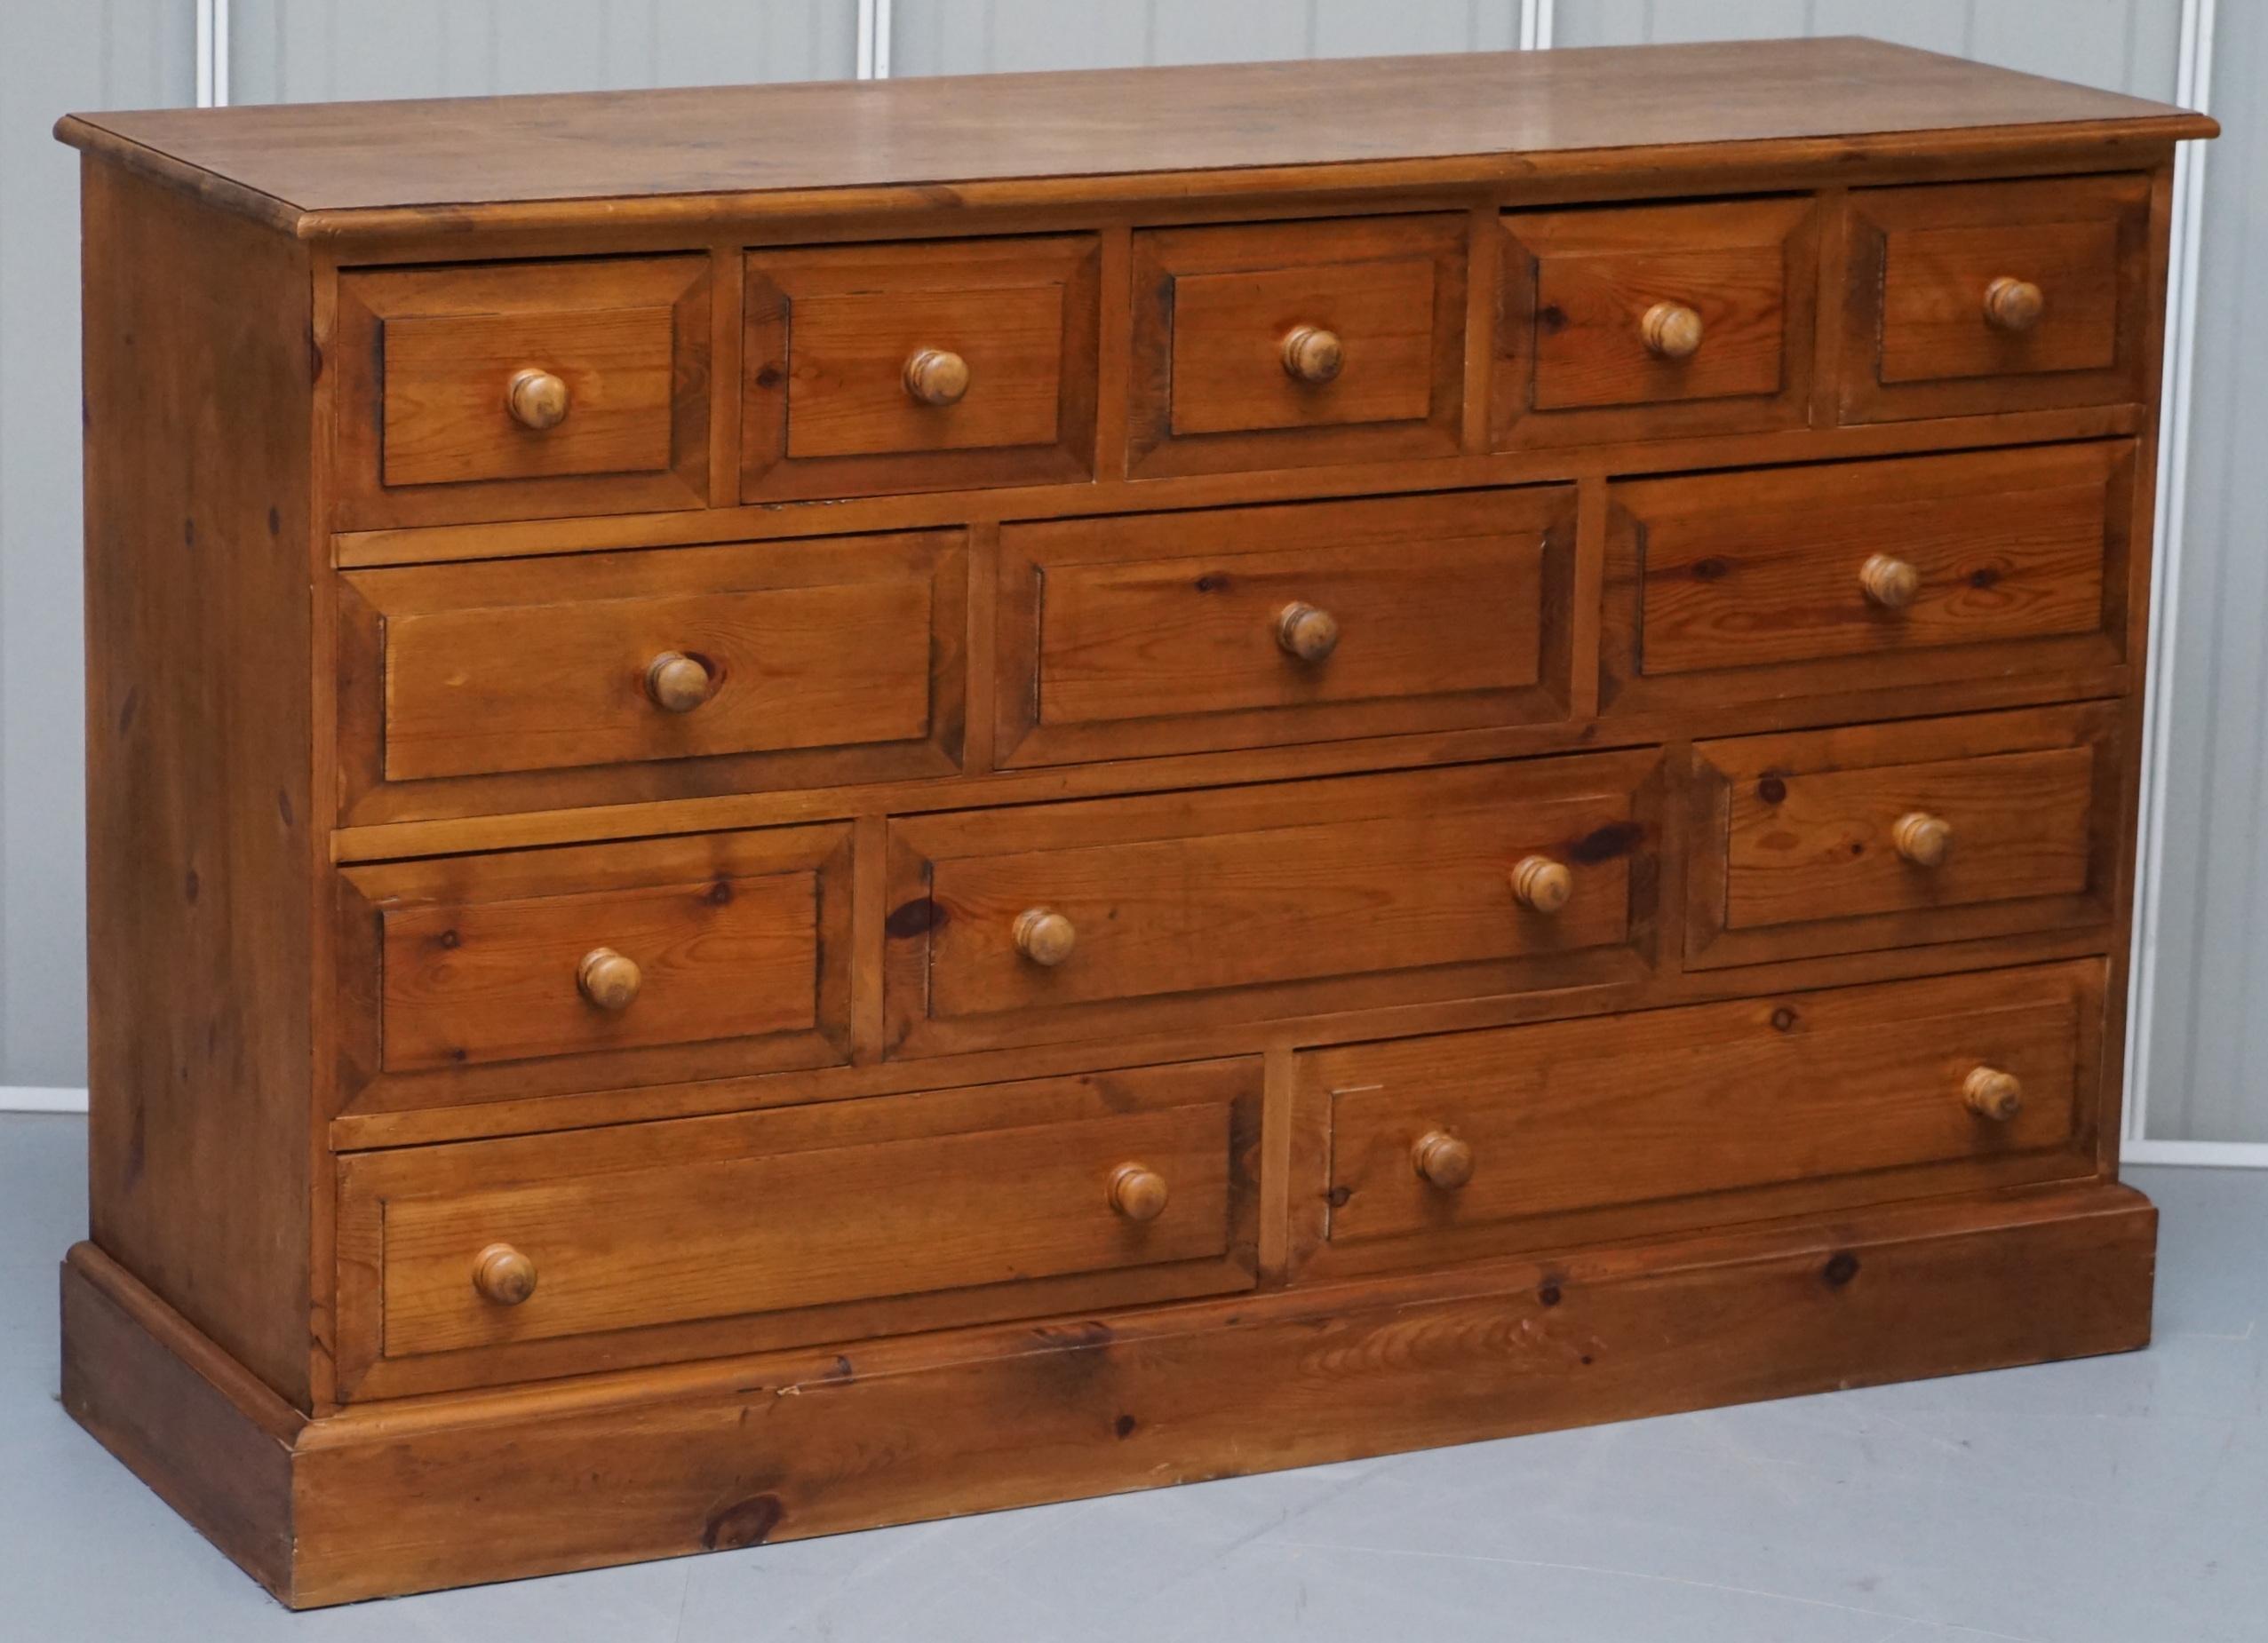 We are delighted to offer for sale this lovely vintage solid pine farmhouse bank of drawers

A good looking well made and decorative piece, the drawers are progressively larger as was the style in the Victorian era with haberdashery drawers

We